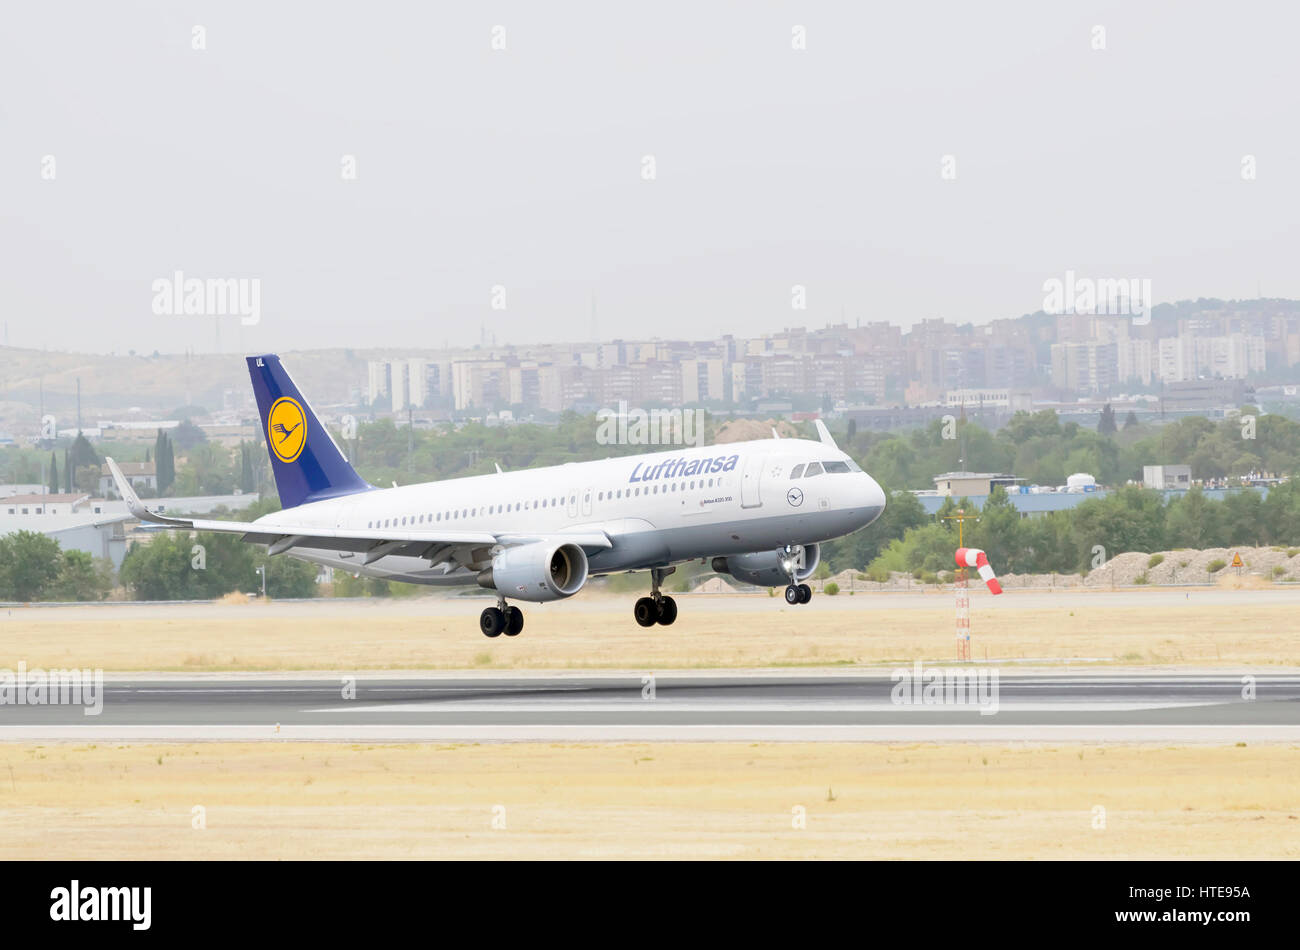 Plane Airbus A320, of Lufthansa airline, is landing on Madrid - Barajas, Adolfo Suarez airport. Cloudy day of summer. Stock Photo